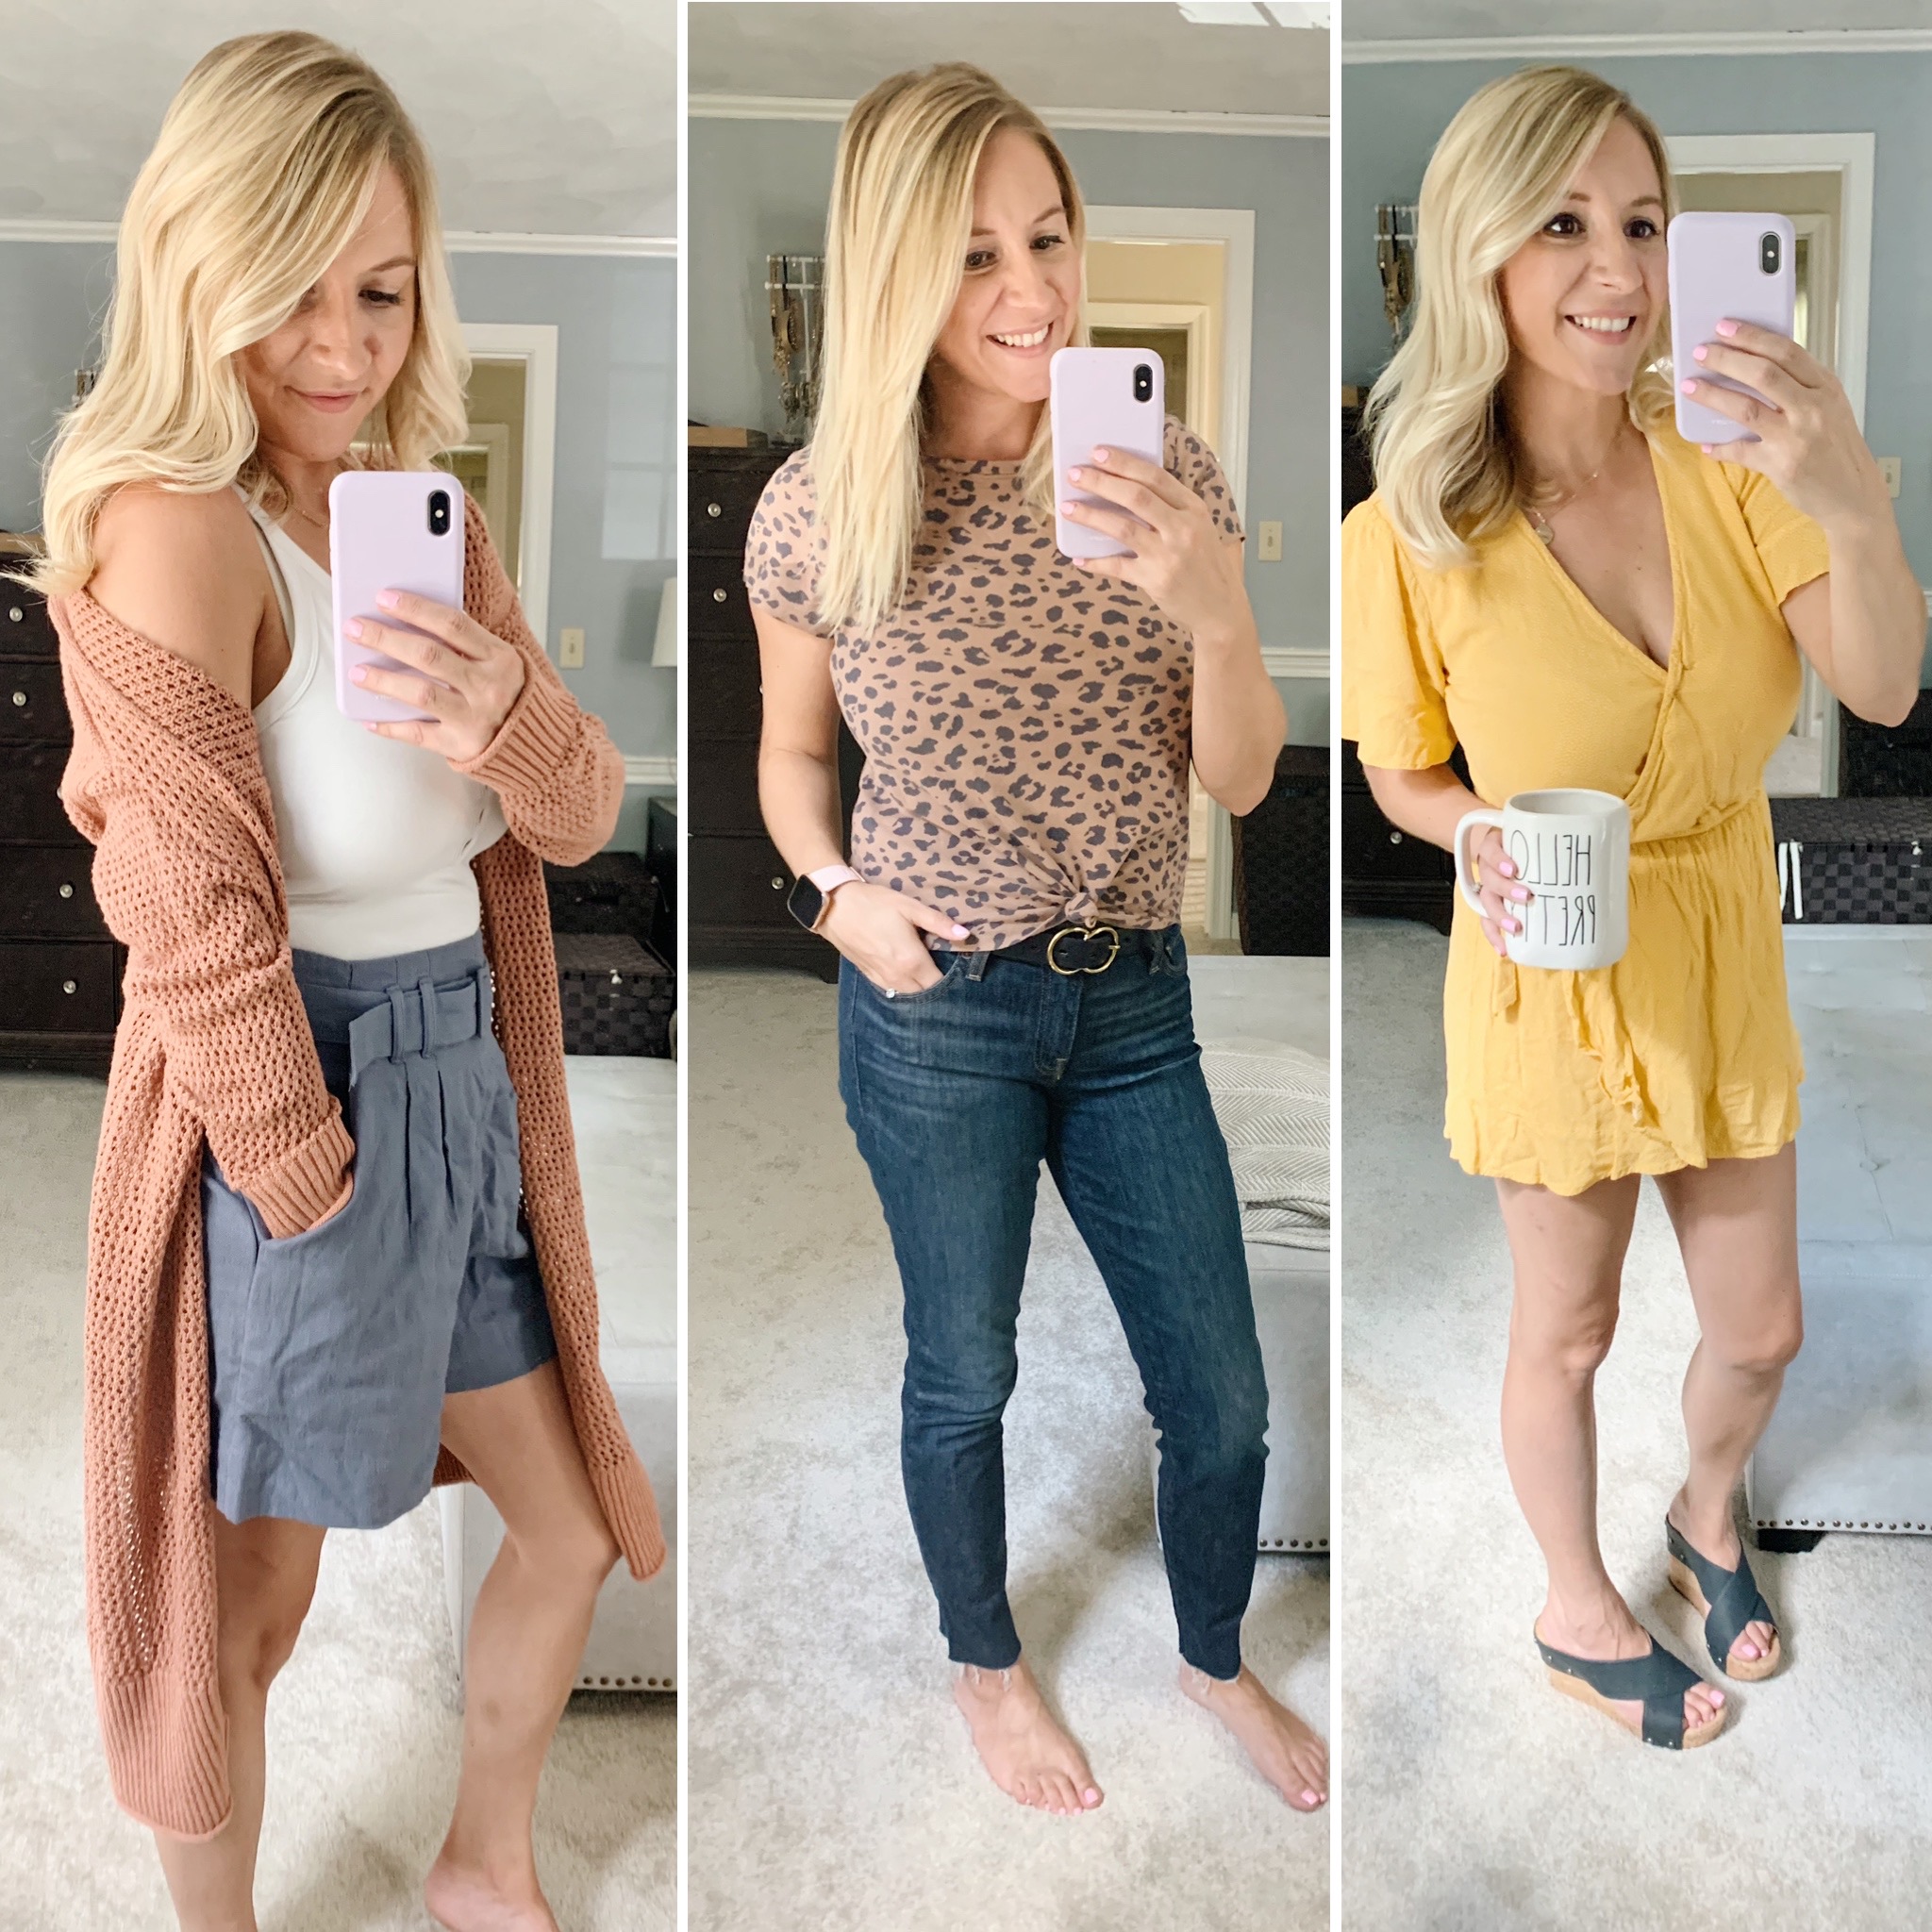 3 Comfy Outfits from Abercrombie & Fitch for Everyday Wear